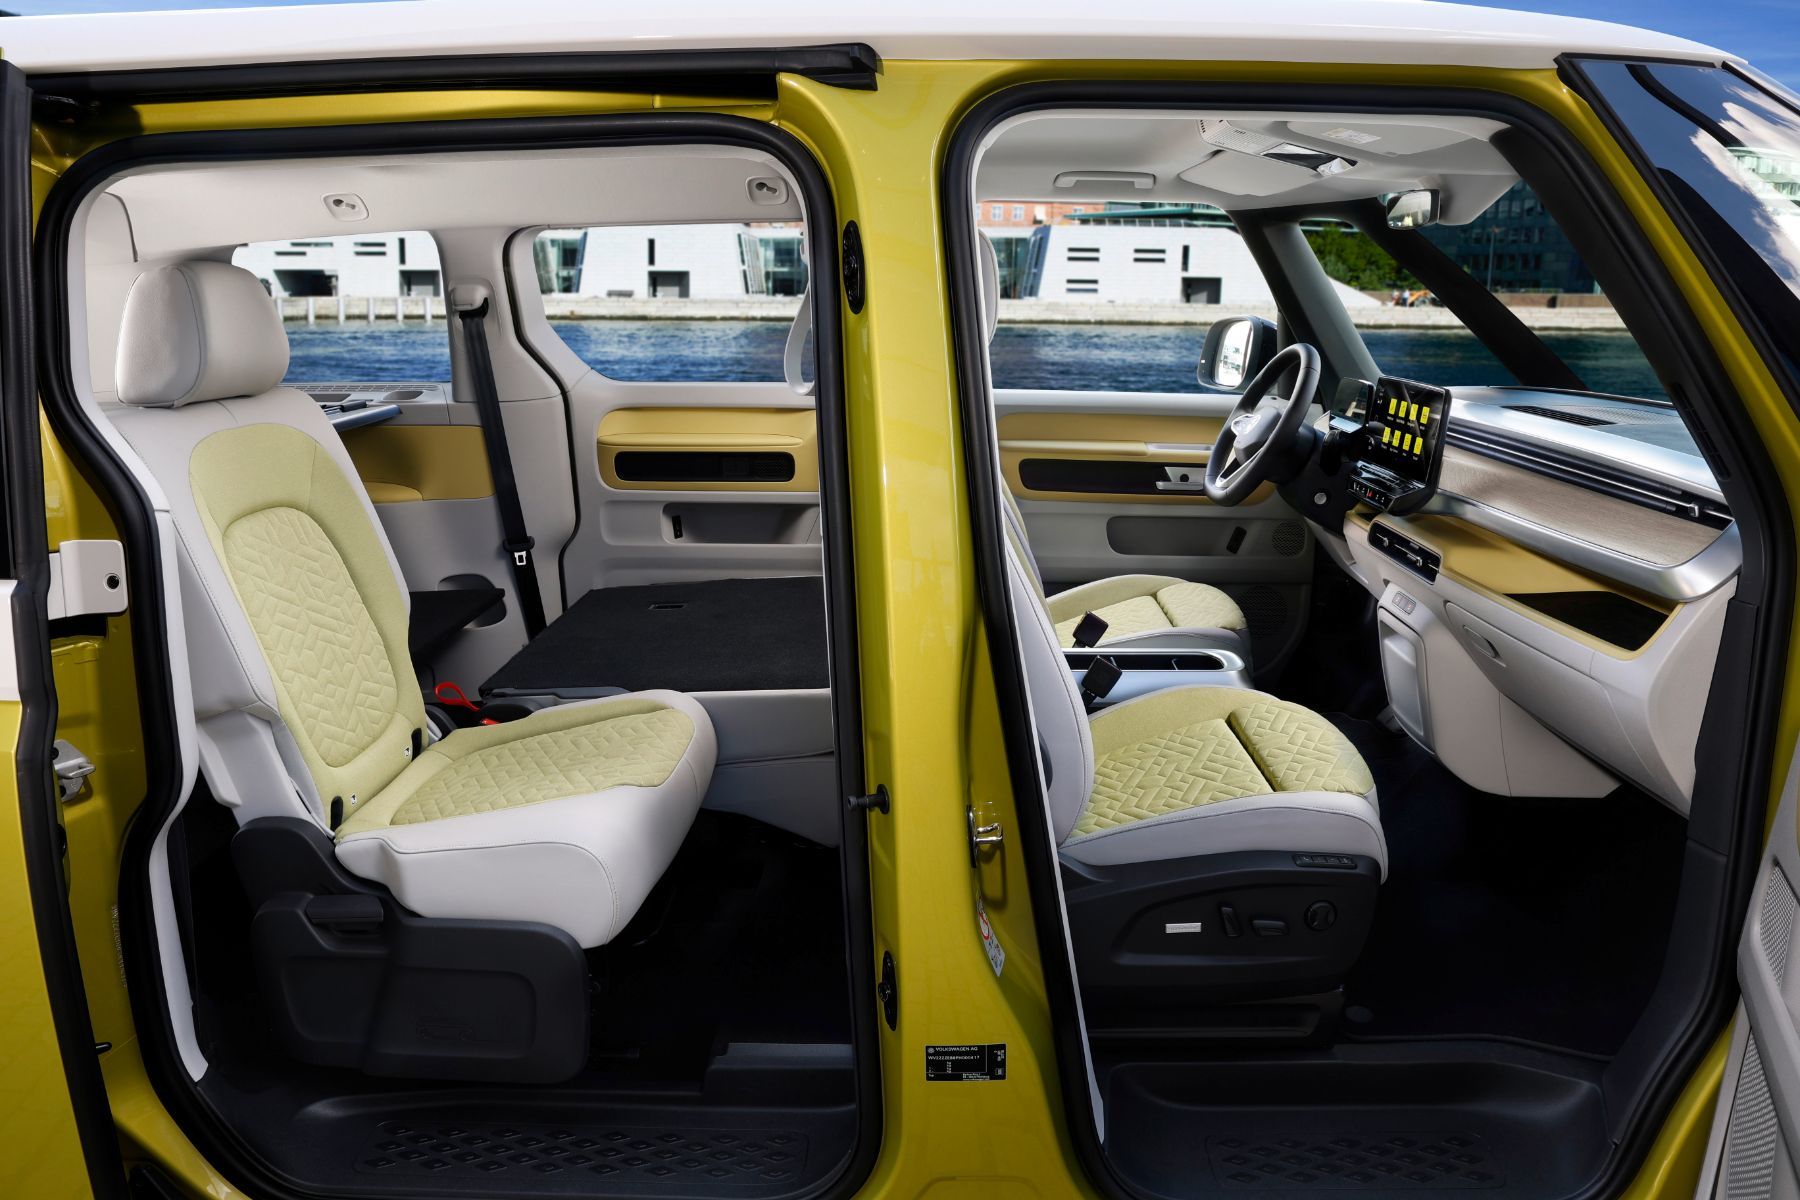 The modular interior of an electric VW Westfalia, including its large rear bench seat